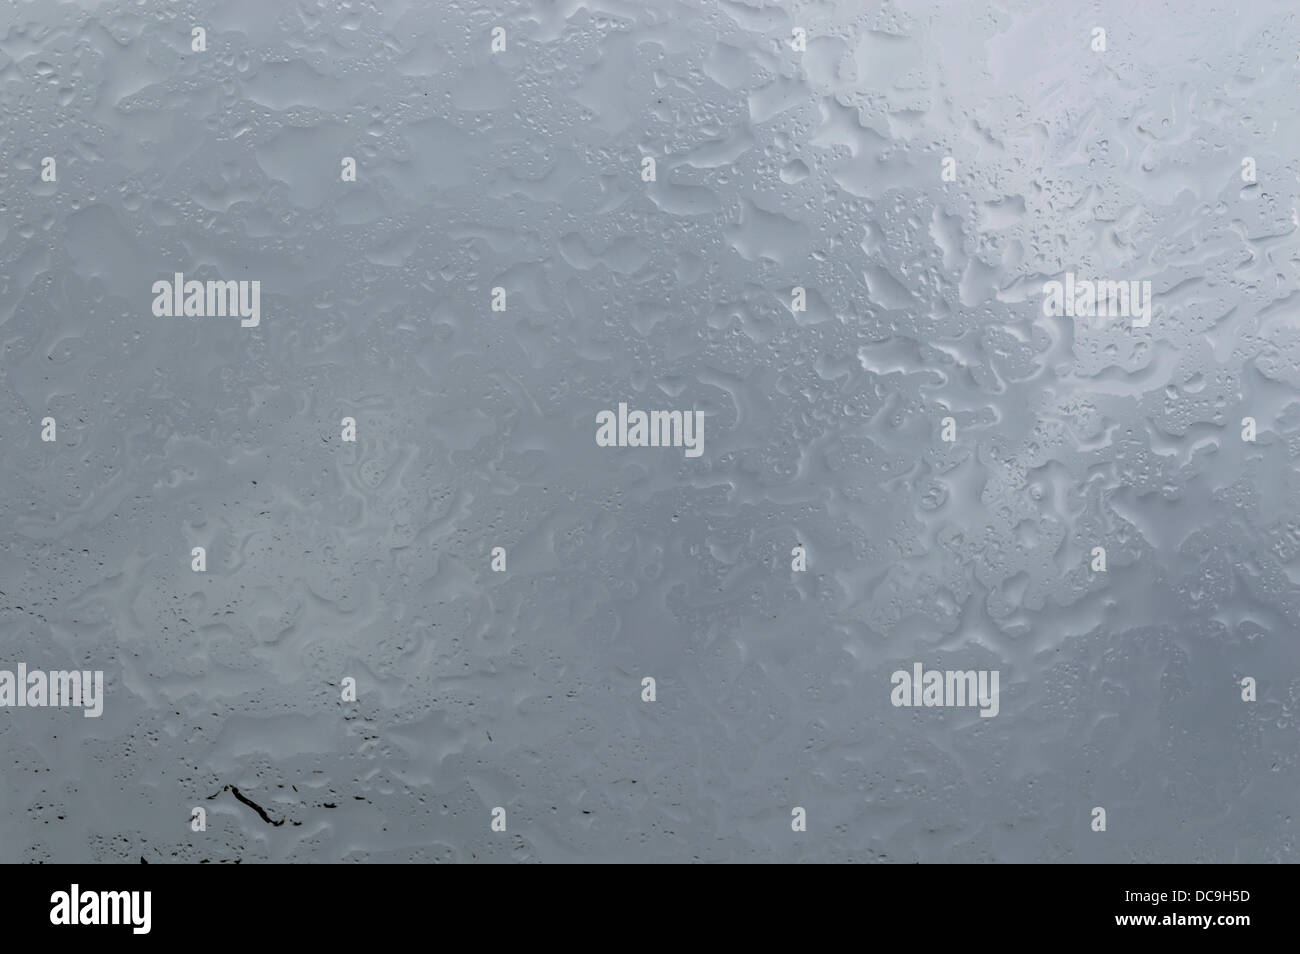 Droplets of water on window Stock Photo